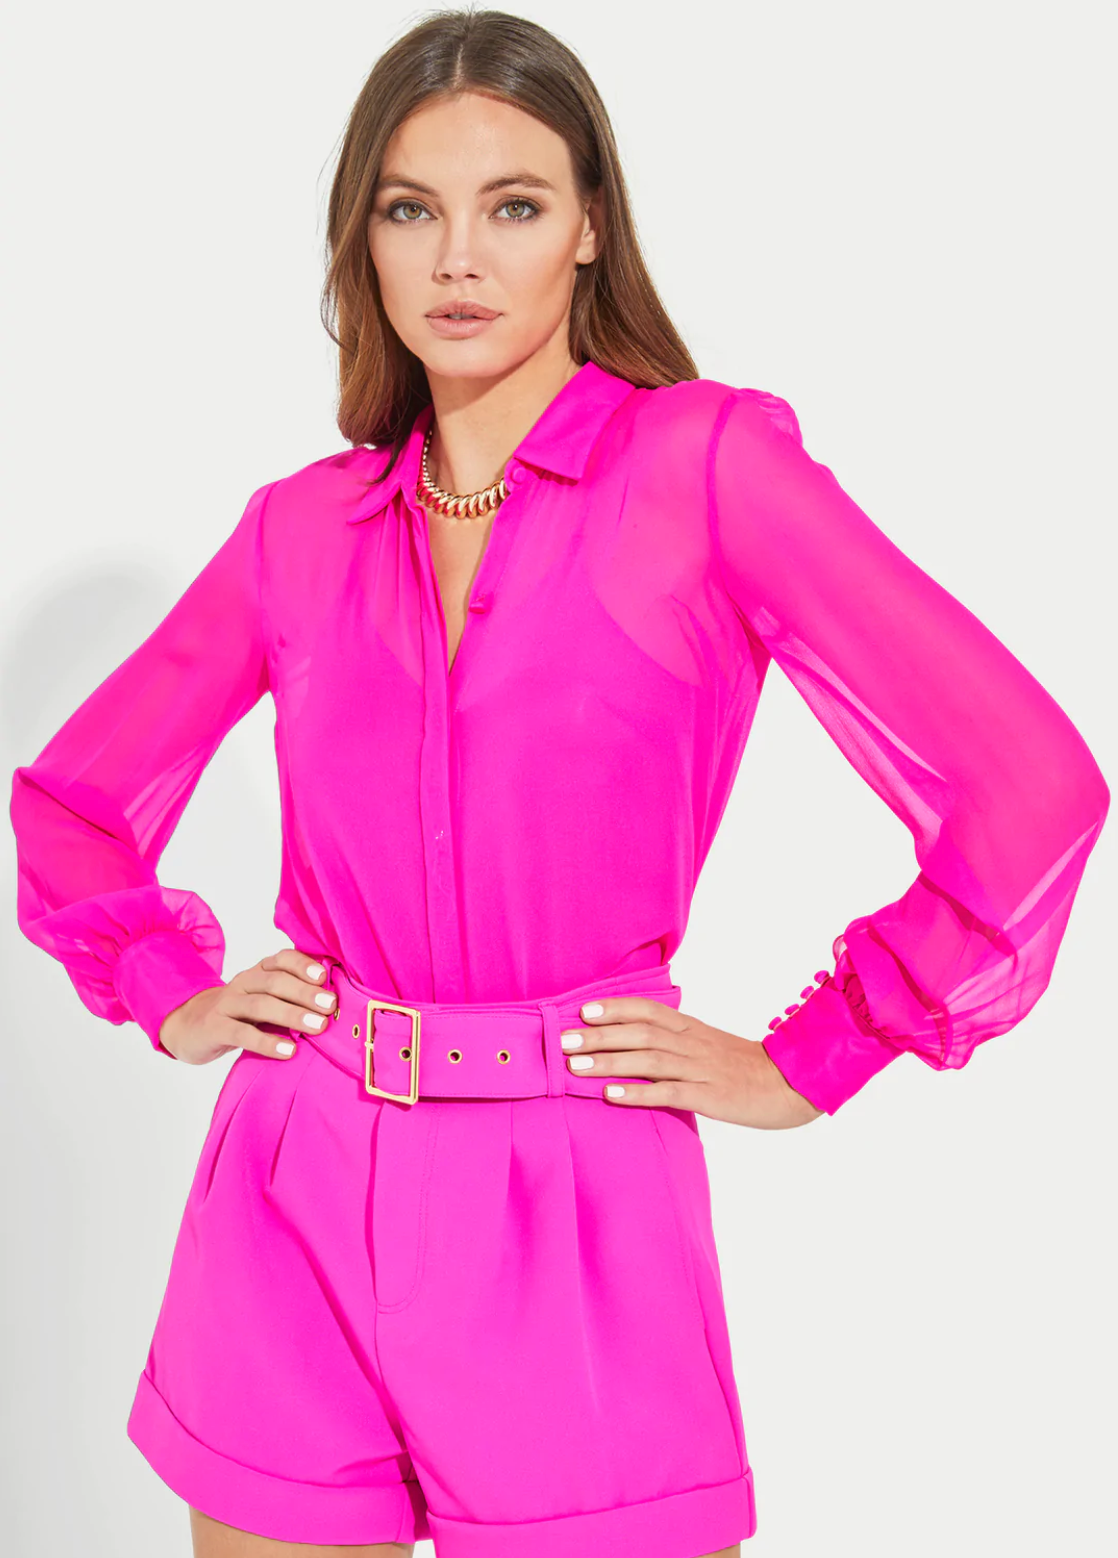 Maxwell georgette blouse - hot pink